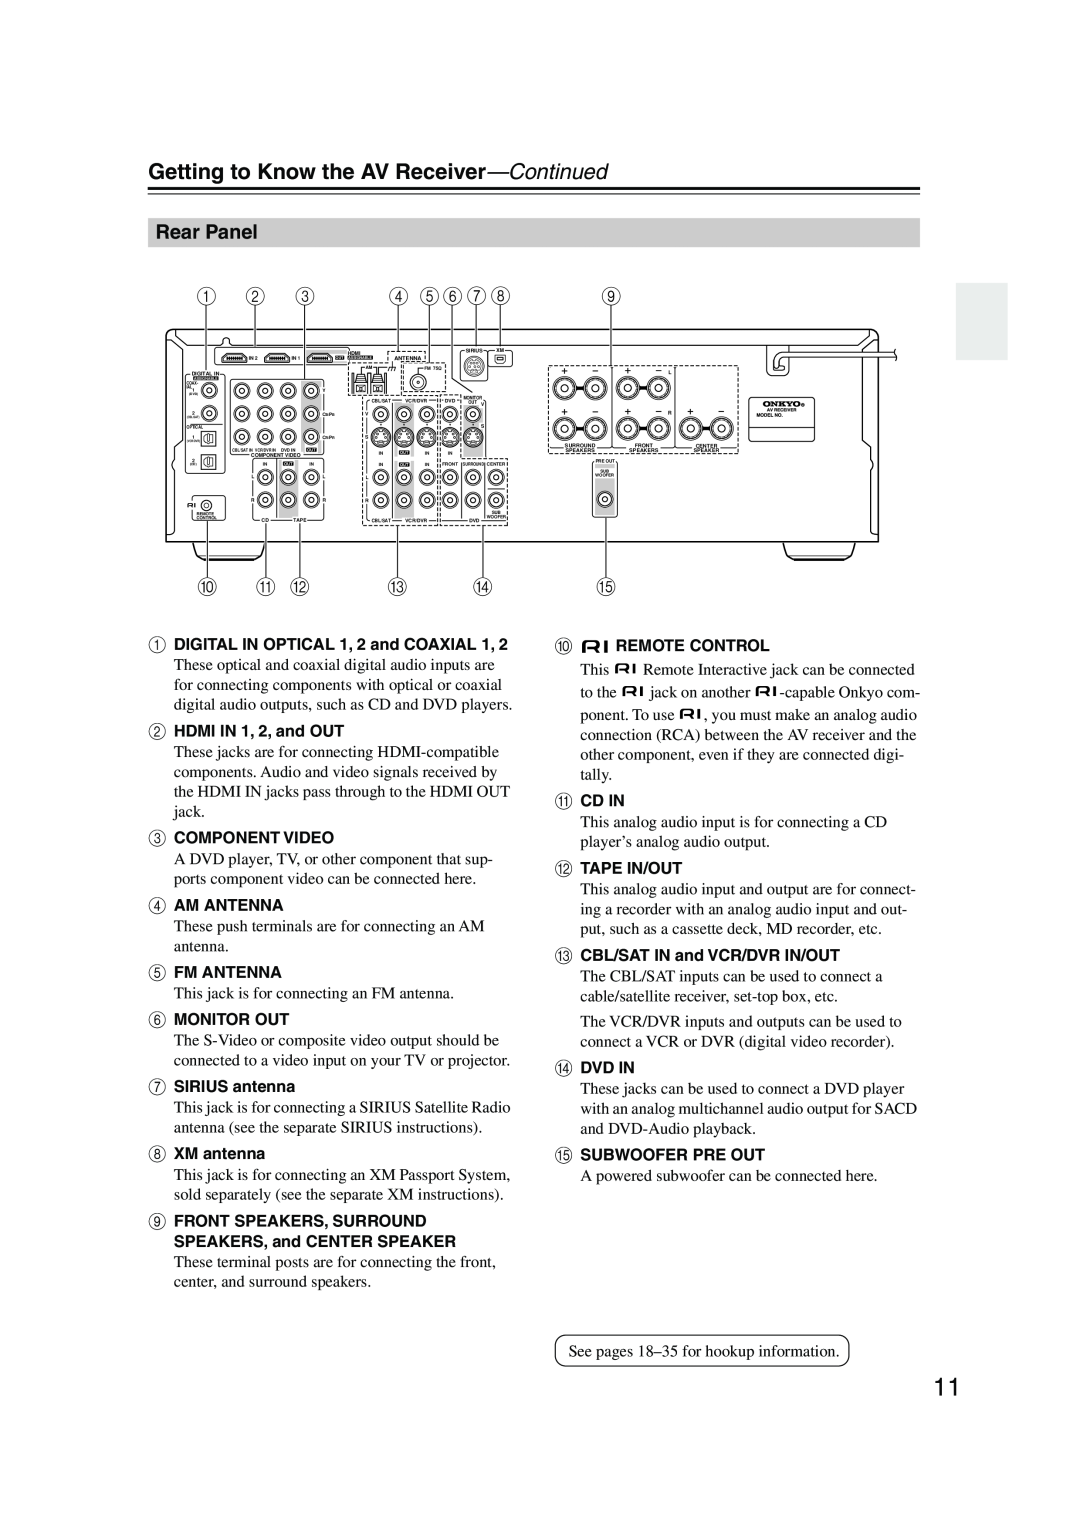 Onkyo HT-SP904 instruction manual Rear Panel, 4 56, J K L M N, Getting to Know the AV Receiver—Continued 